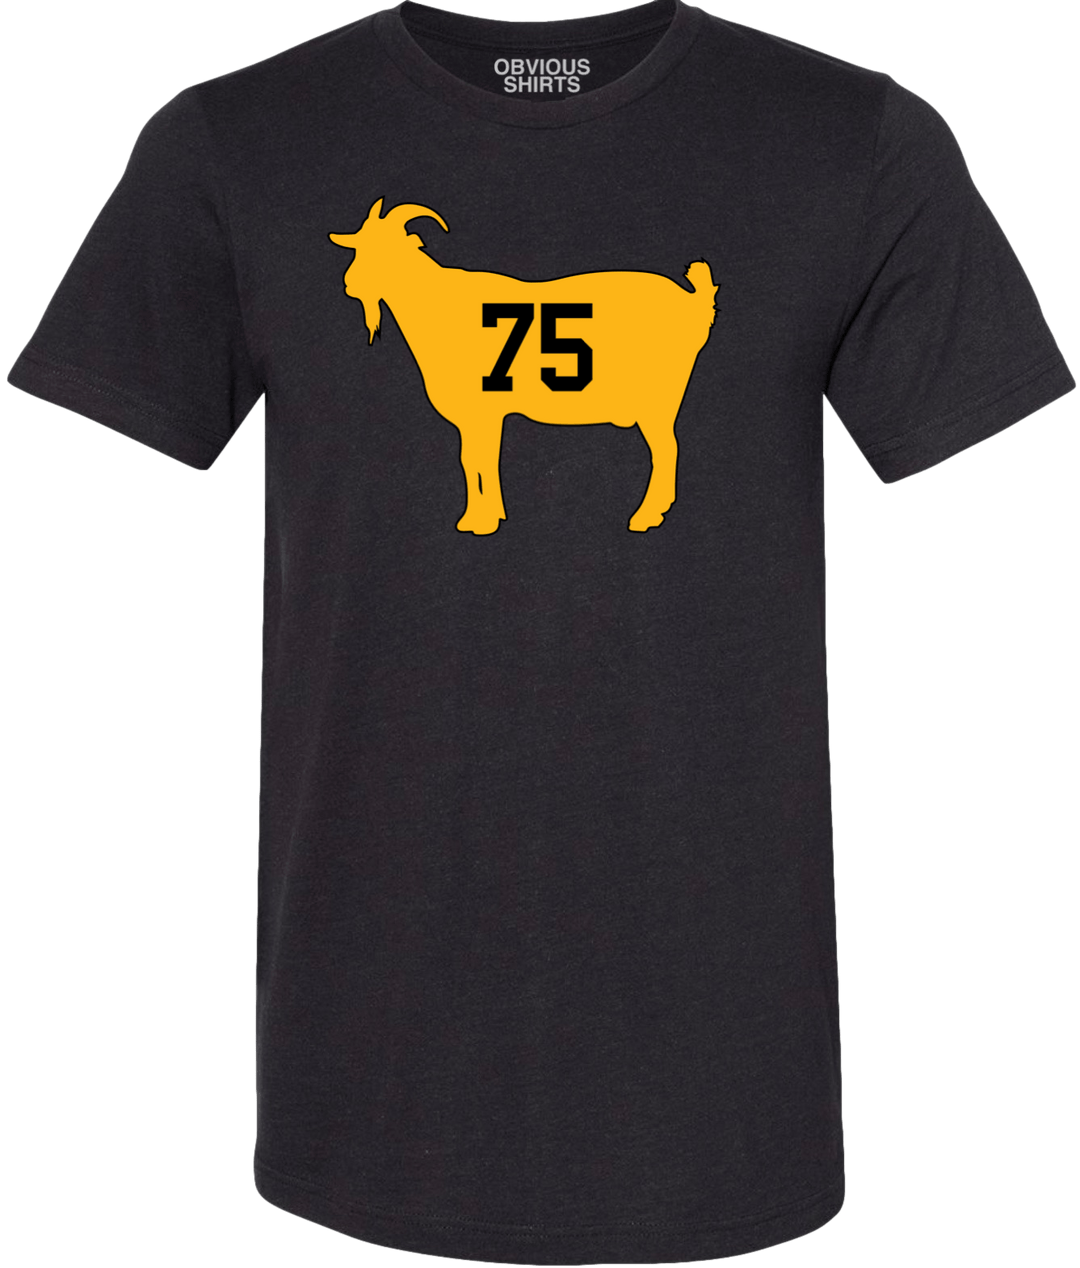 PITTSBURGH GOAT 75. - OBVIOUS SHIRTS